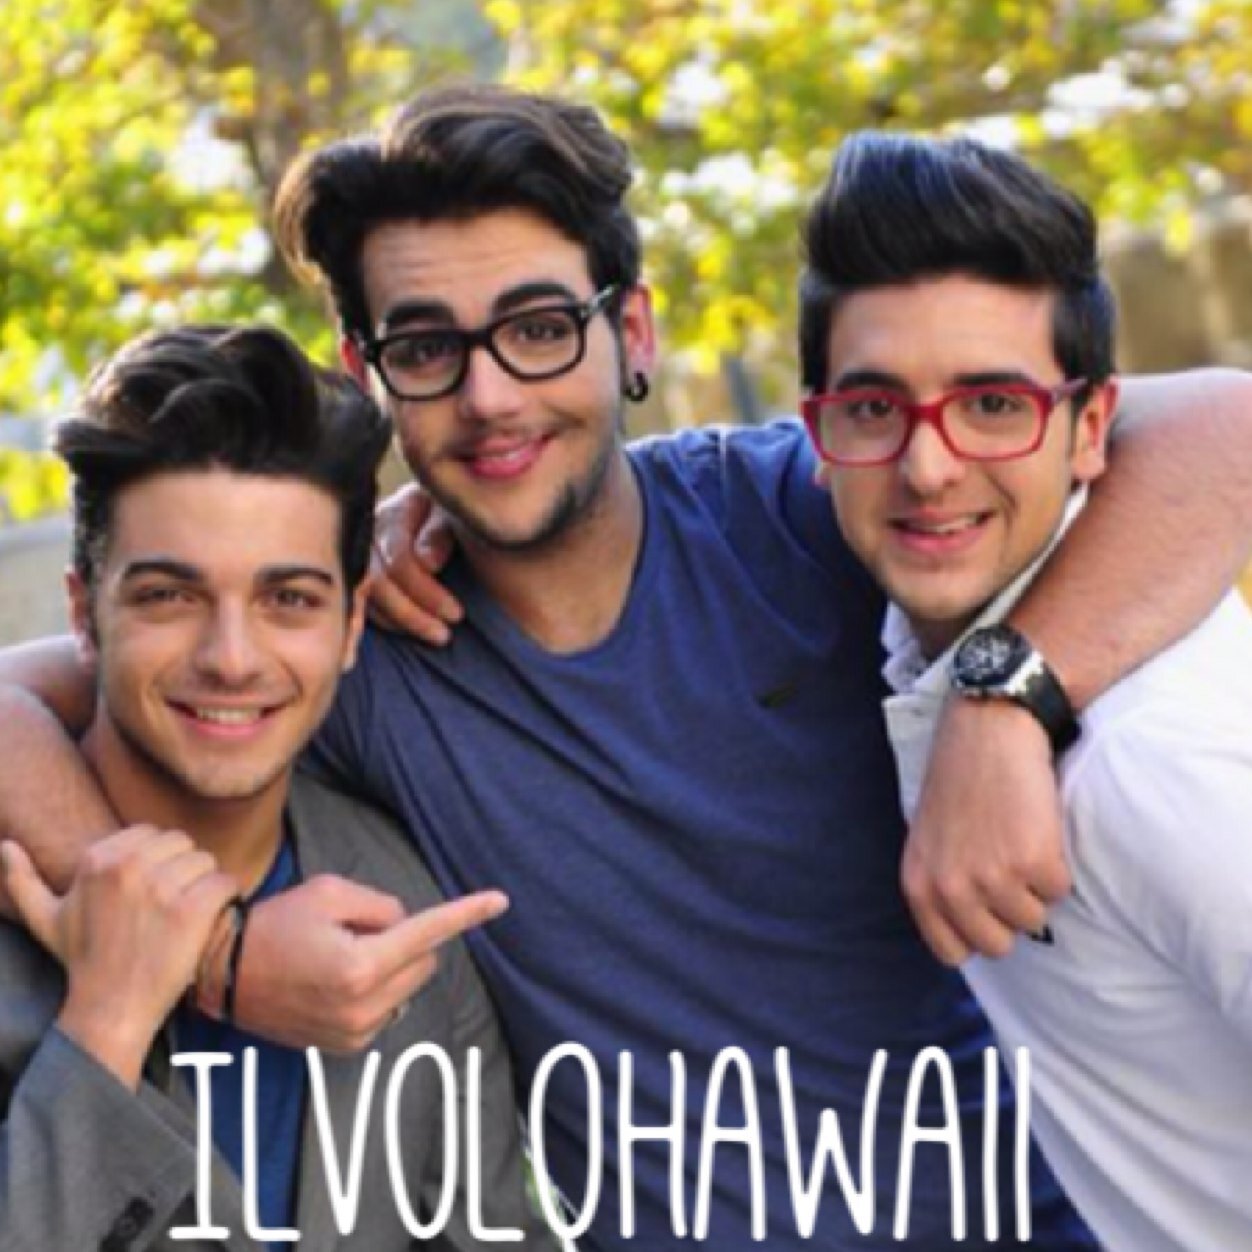 Aloha!!Please help support Il Volo Hawaii. Hawaii will be waiting! We might be in the middle of the pacific ocean but we love IL VOLO too. GG & Piero follows us